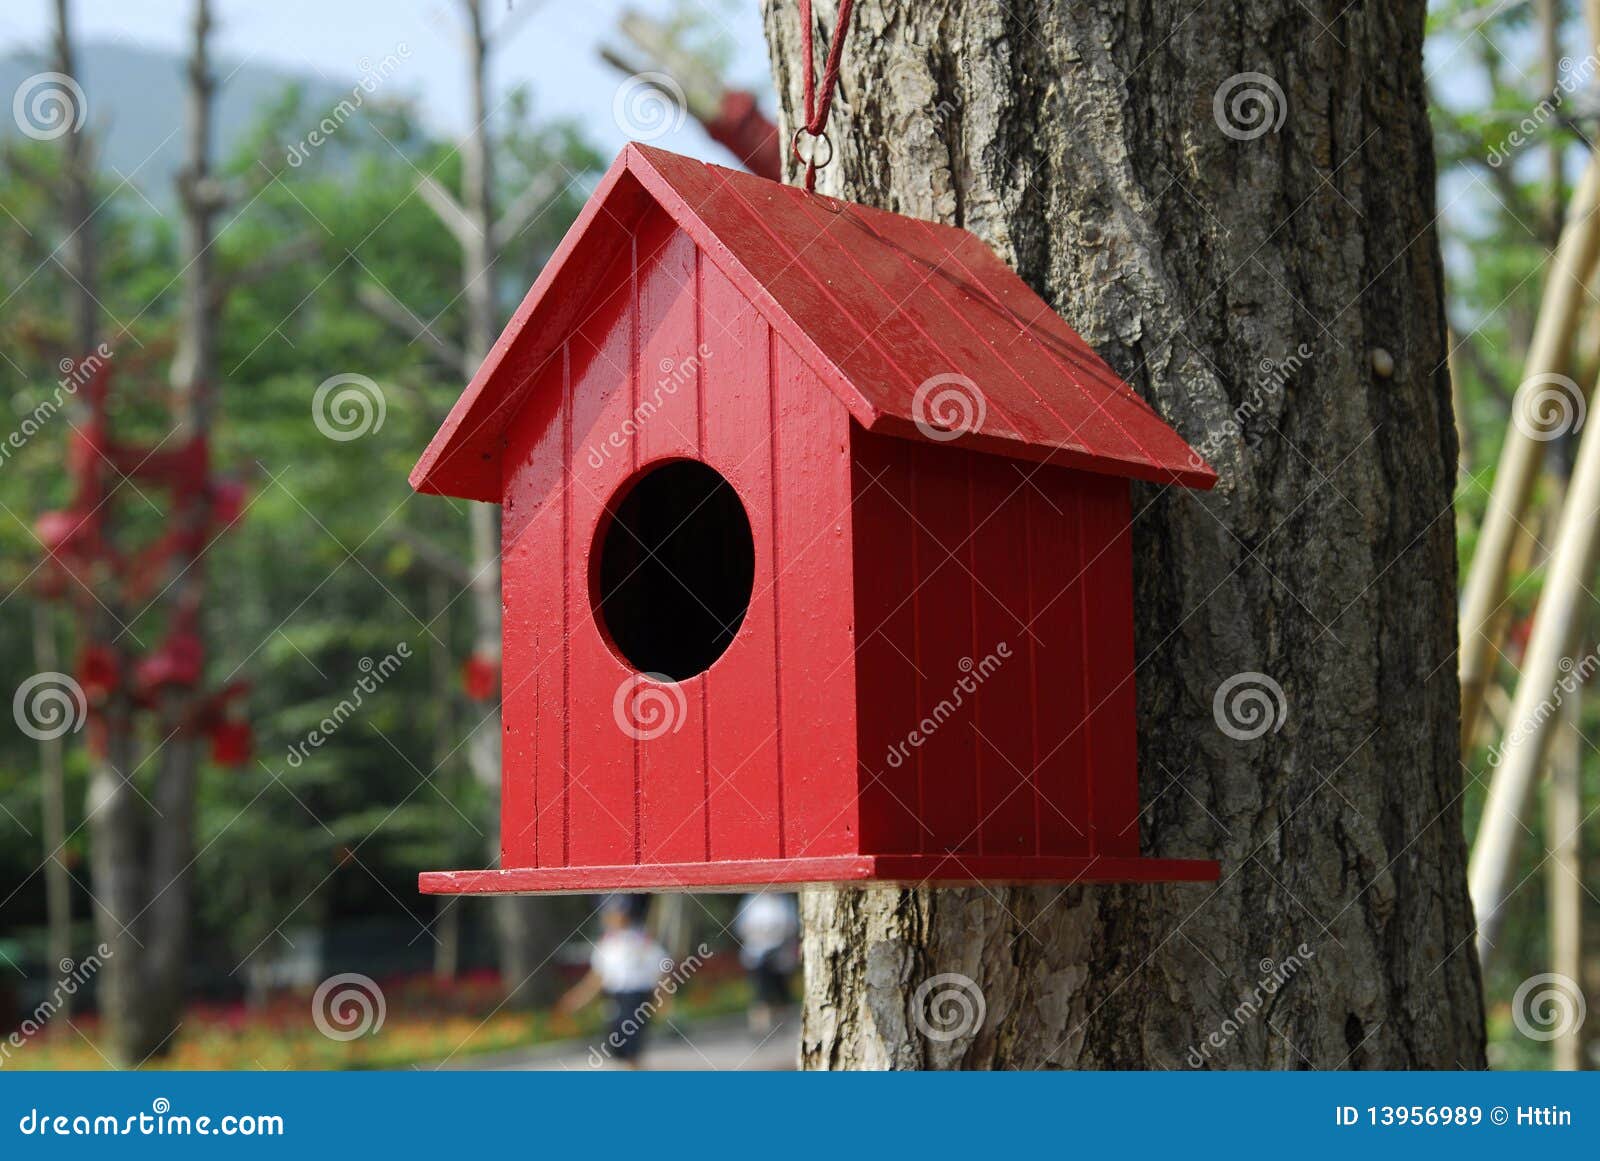 Wooden Bird Nest Royalty Free Stock Images - Image: 13956989